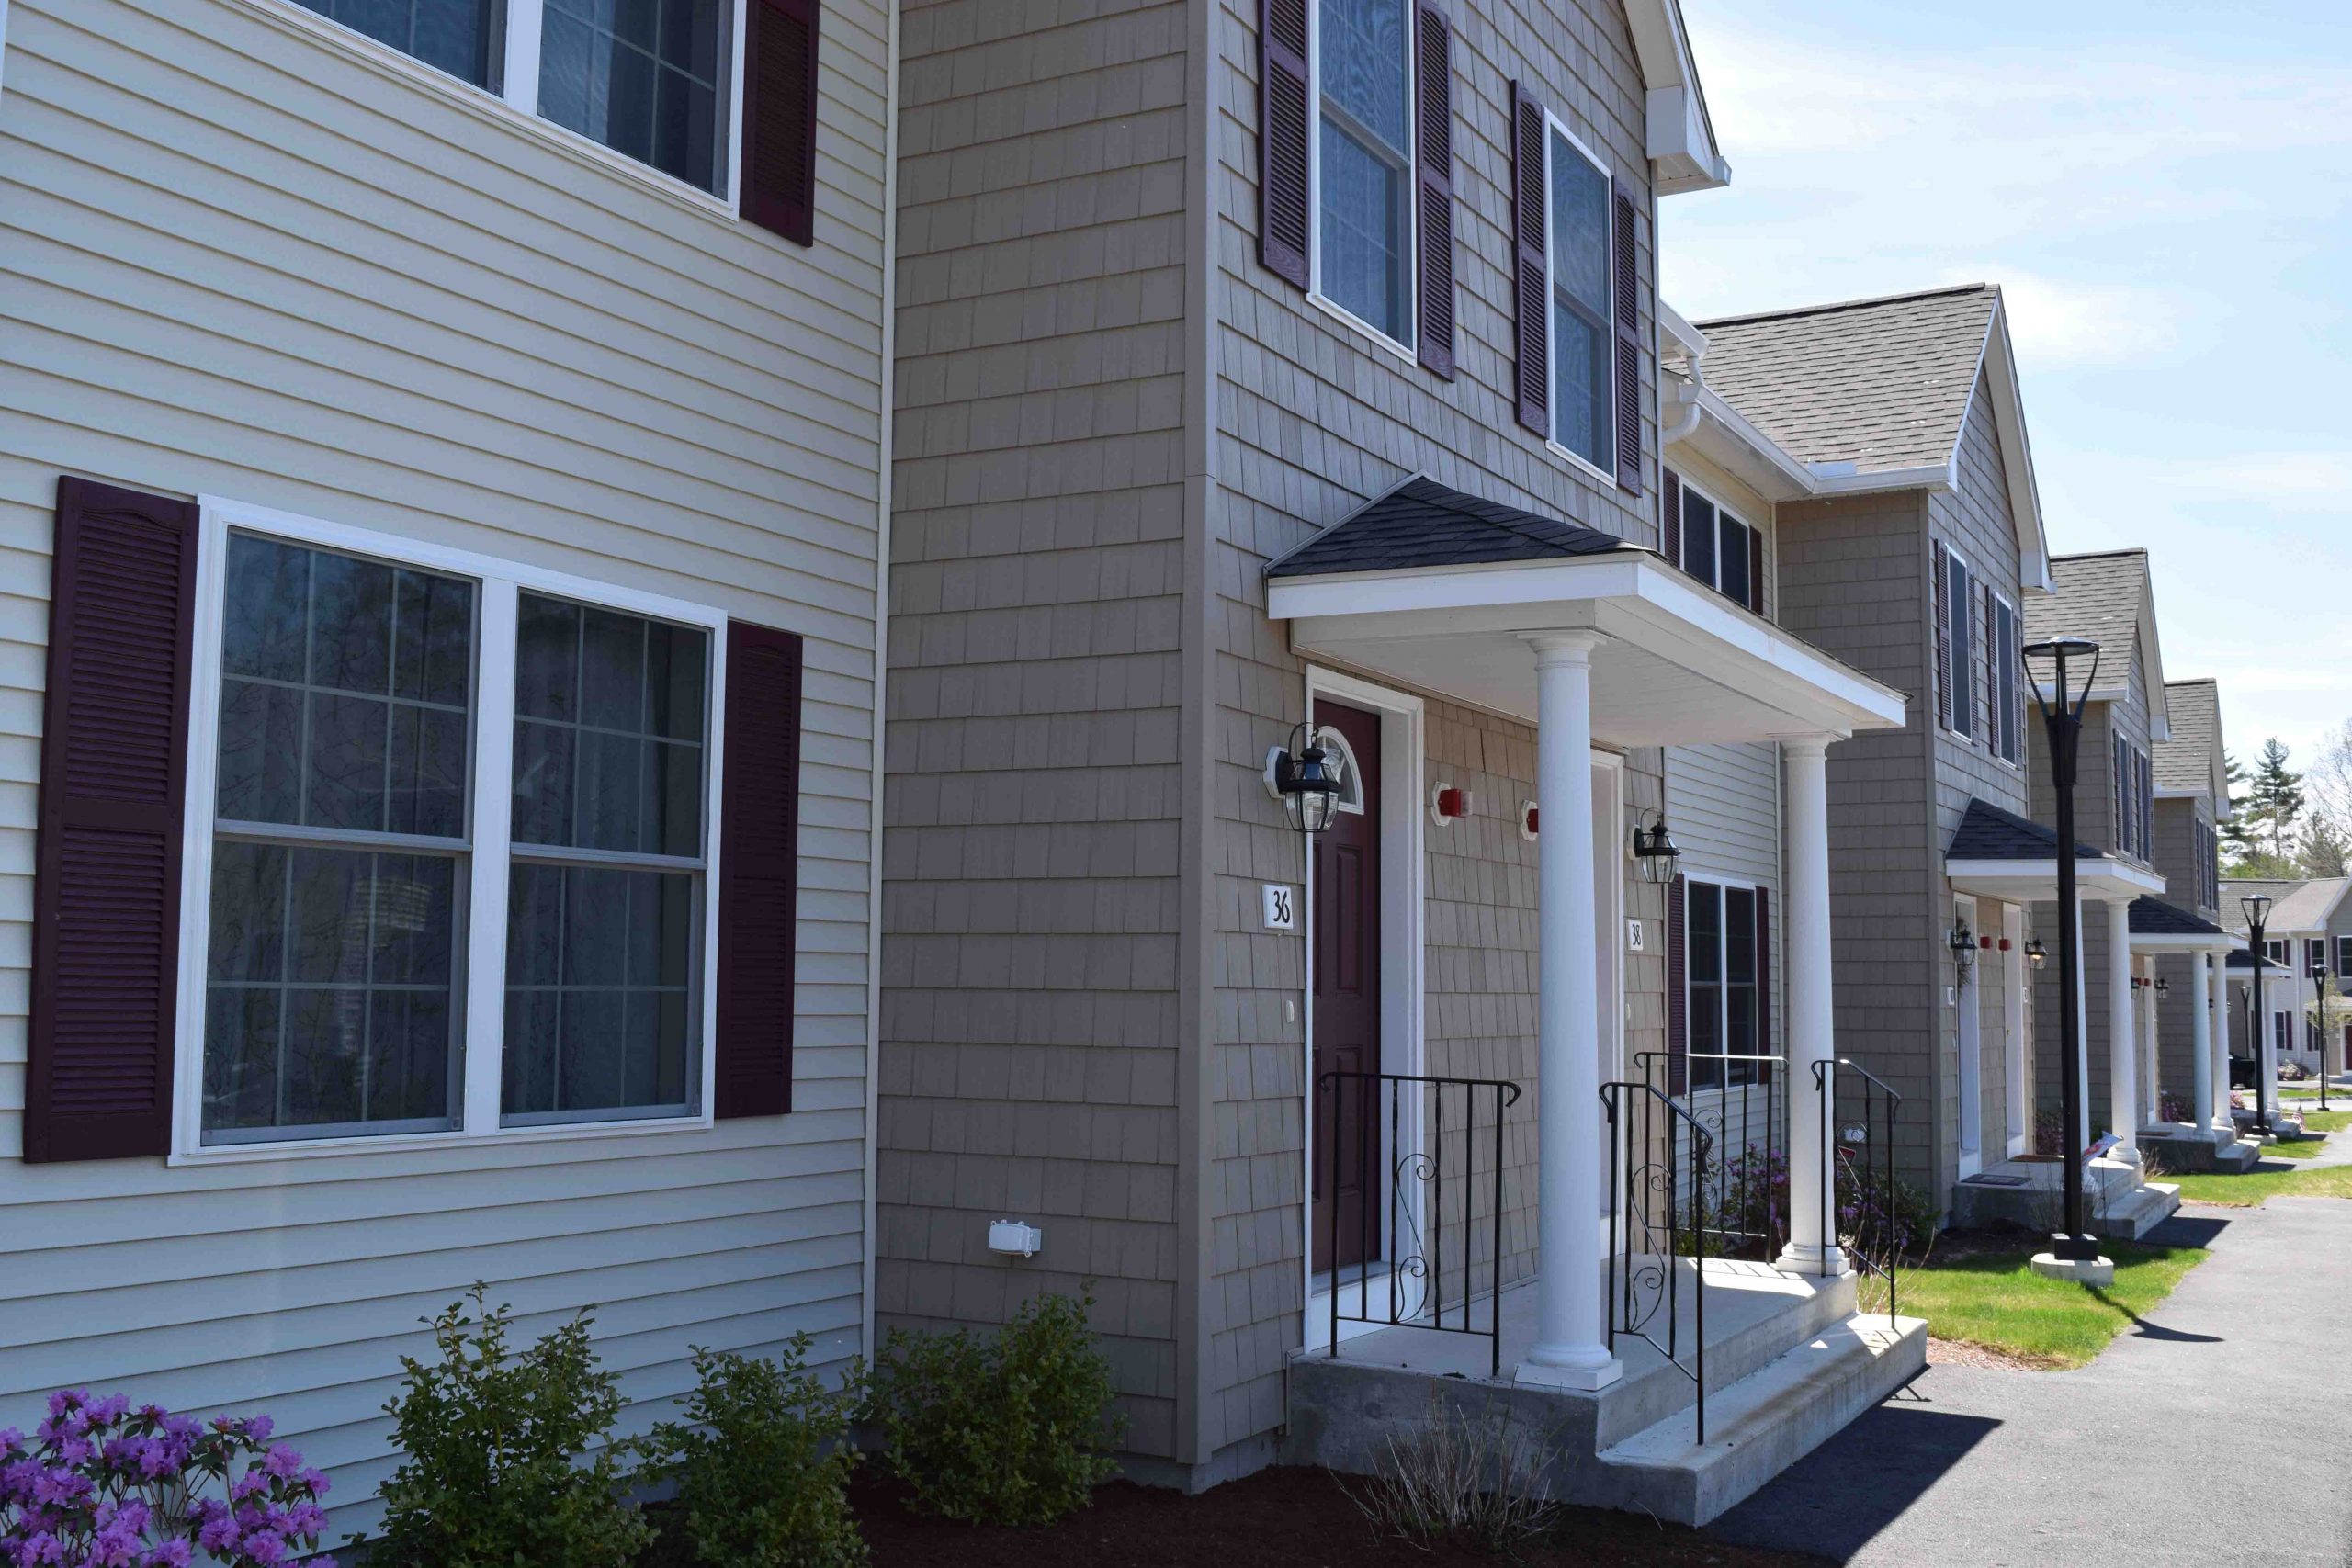 Evergreen Way townhouse front by Socha Companies is a quality townhouse community in Manchester, NH